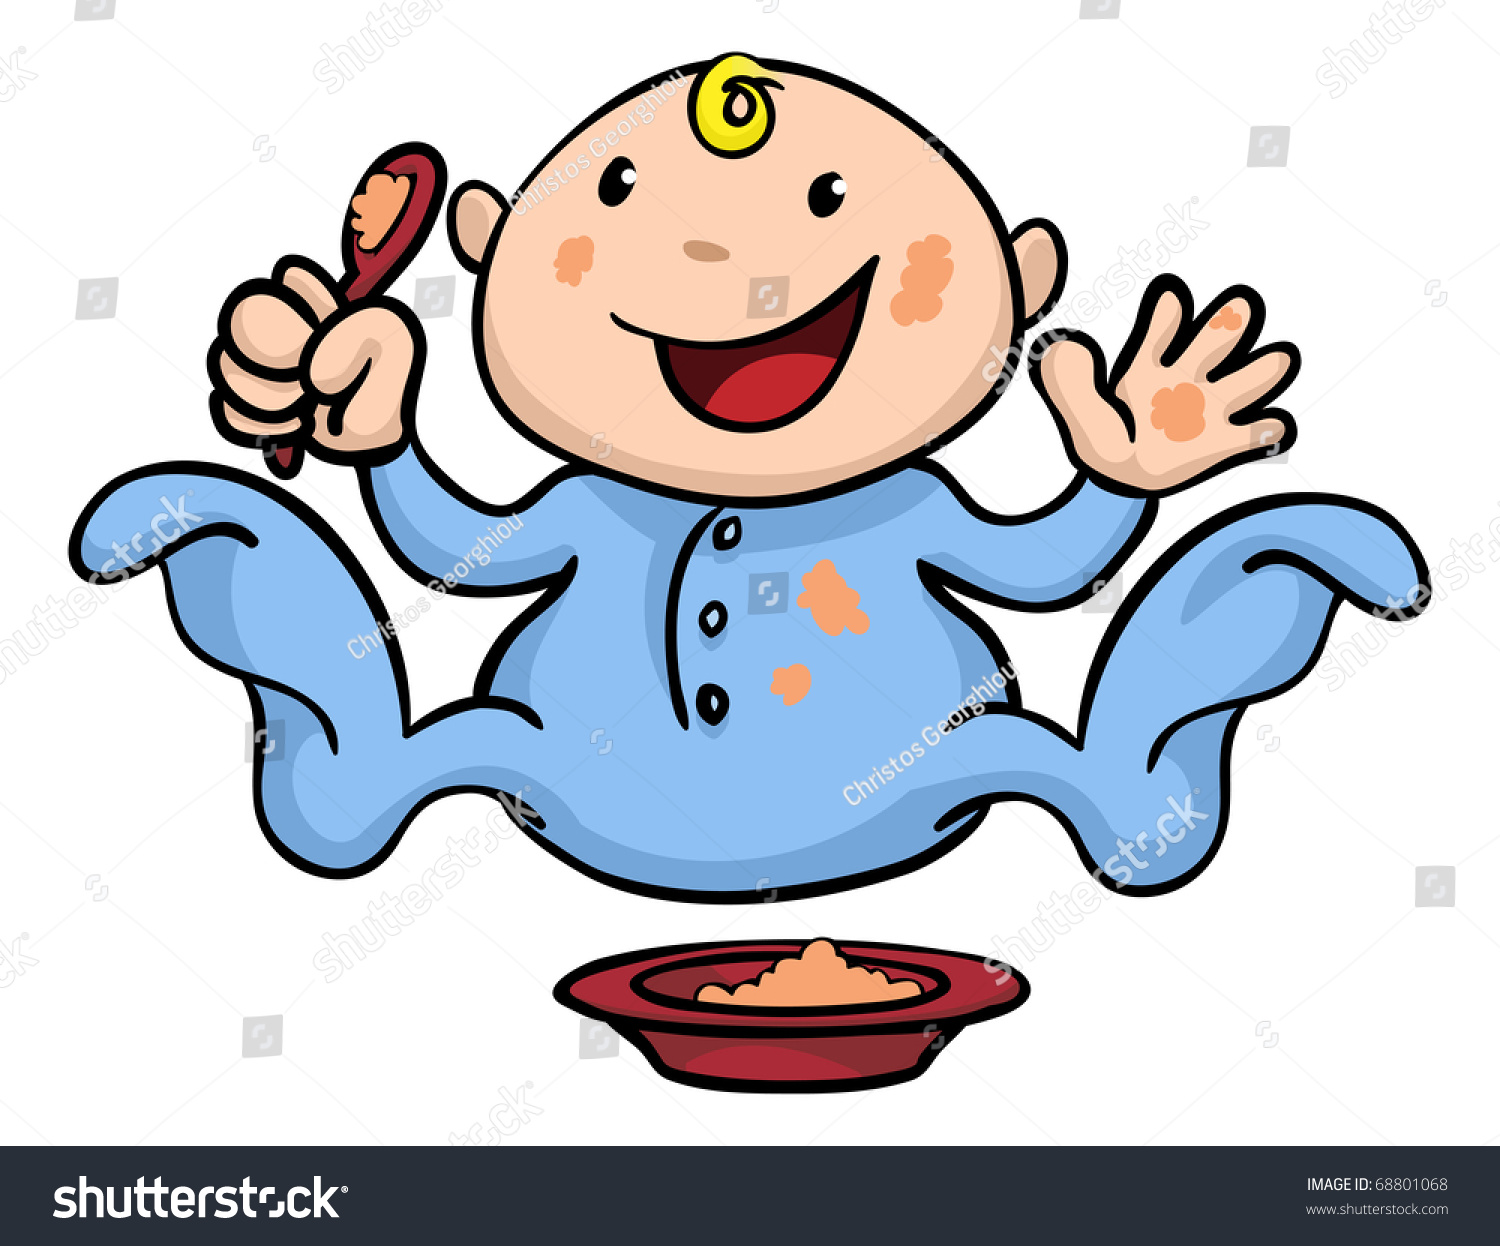 baby eating clipart - photo #7